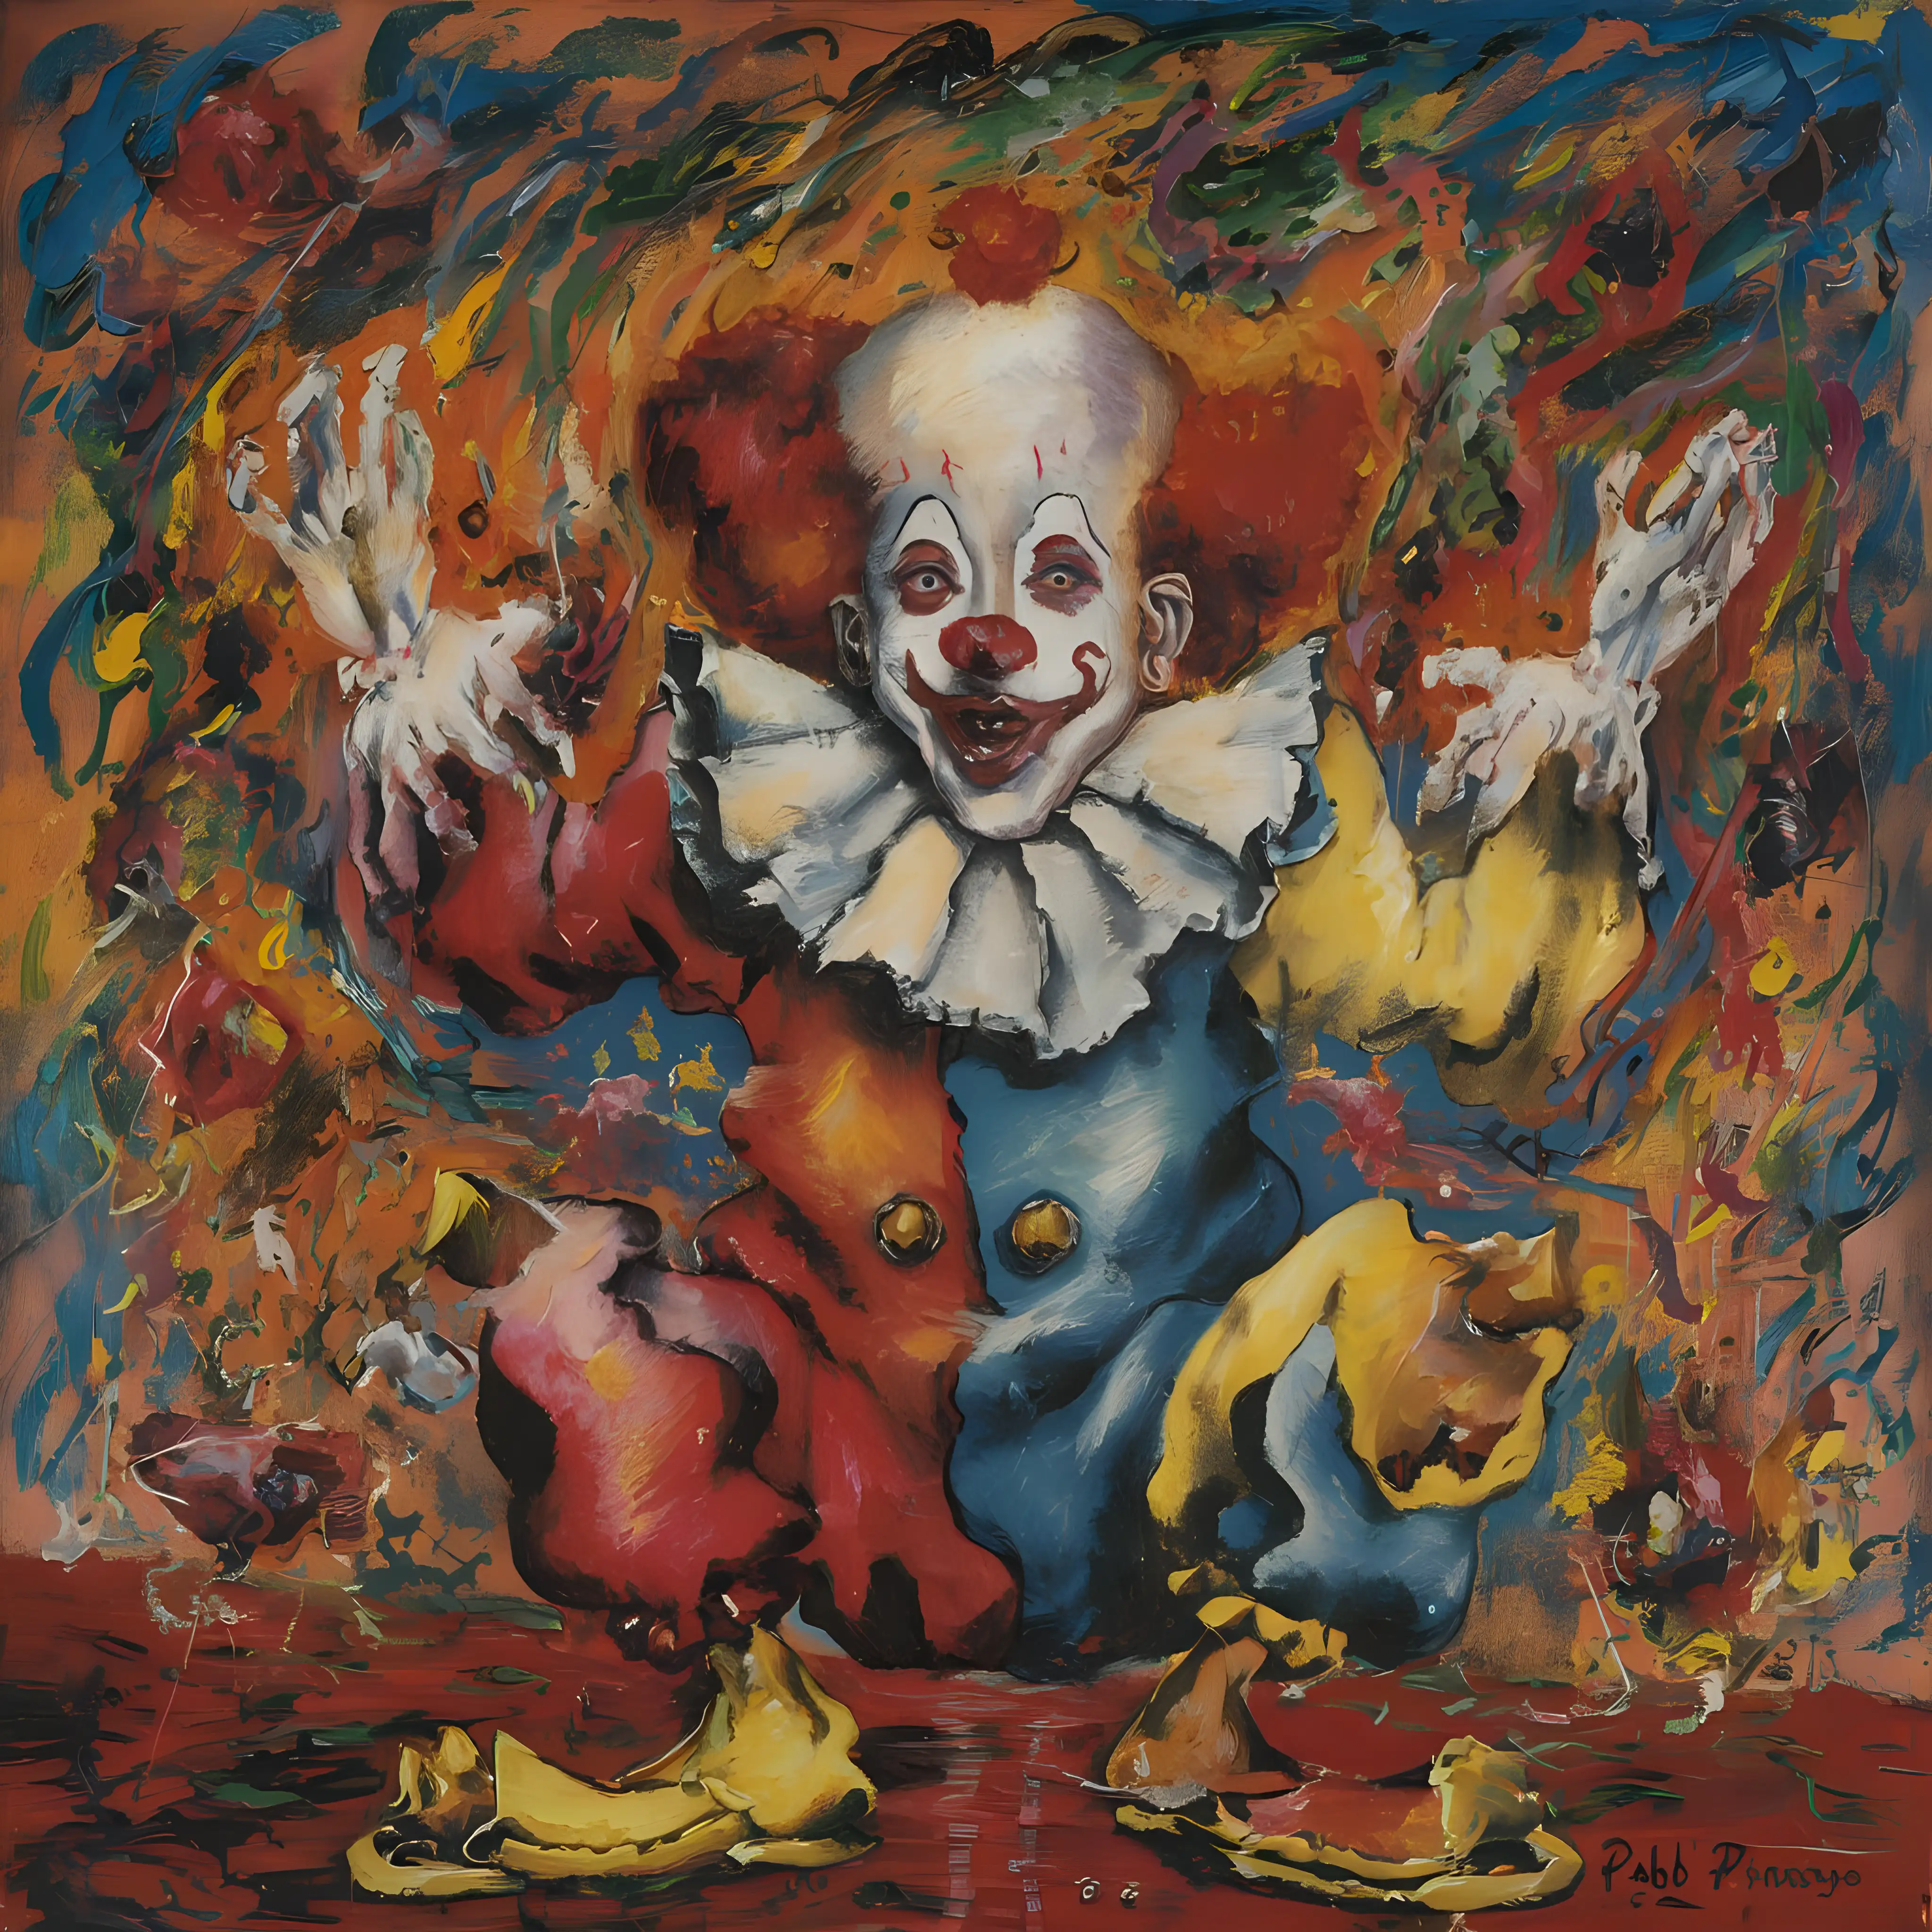 Oil painting of a distorted clown by Pablo Picasso